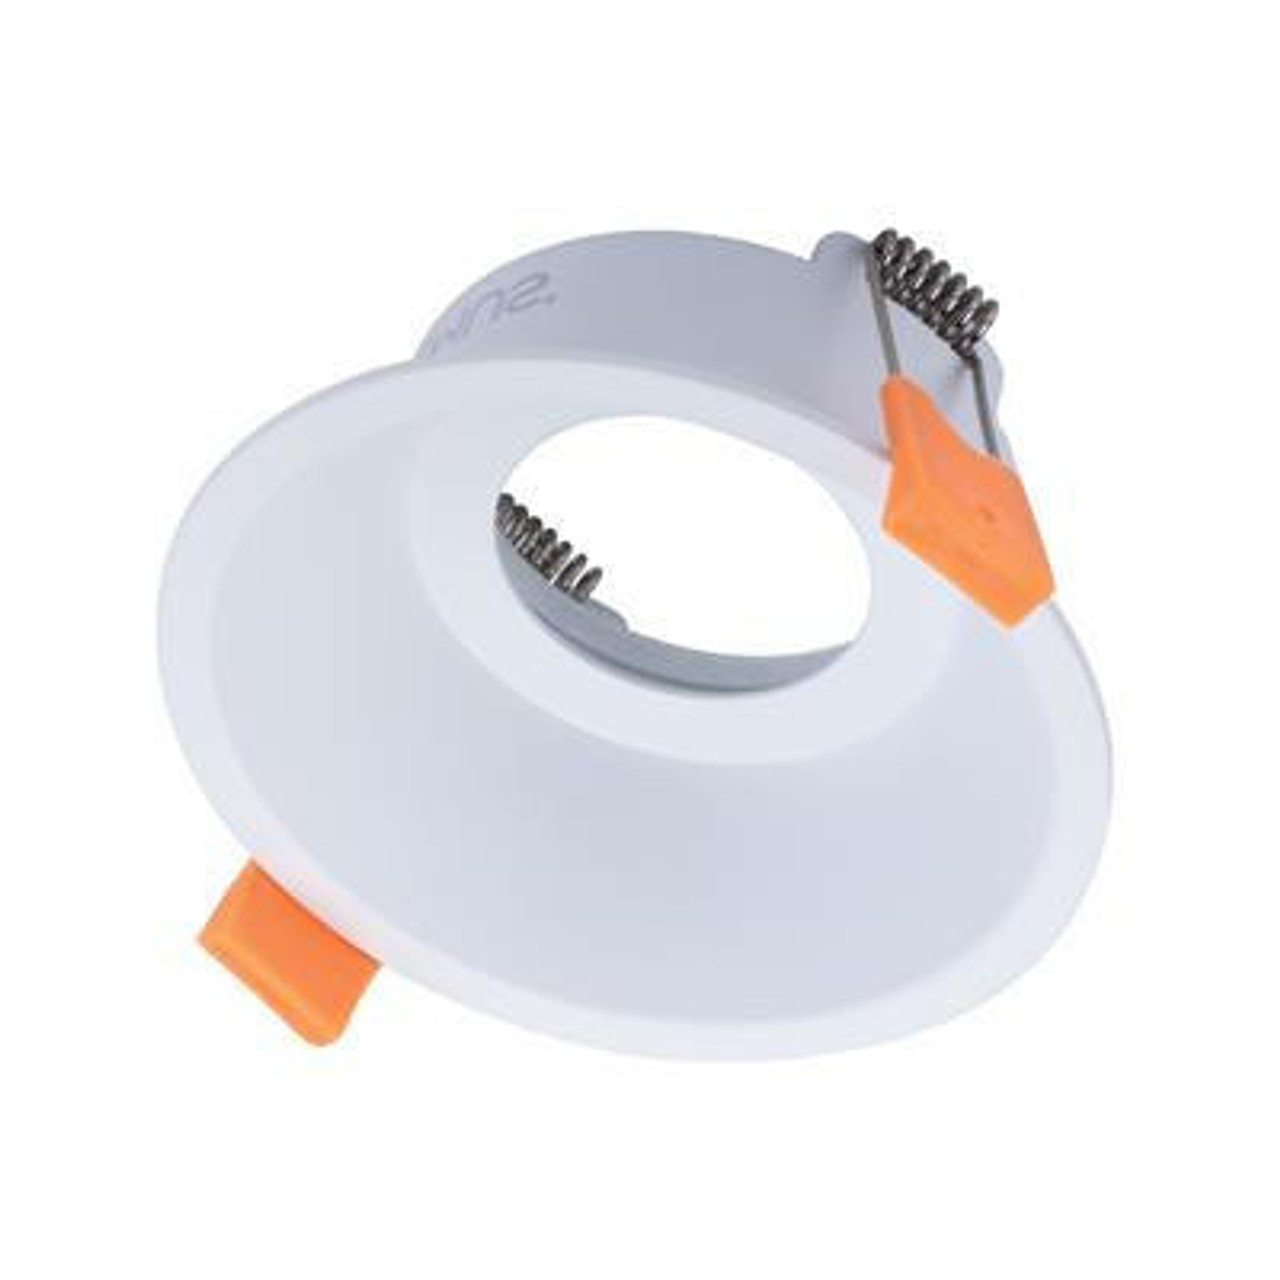 Domus CELL FRAME DEEP90 RECESSED DOWNLIGHT BODY WHITE 27050